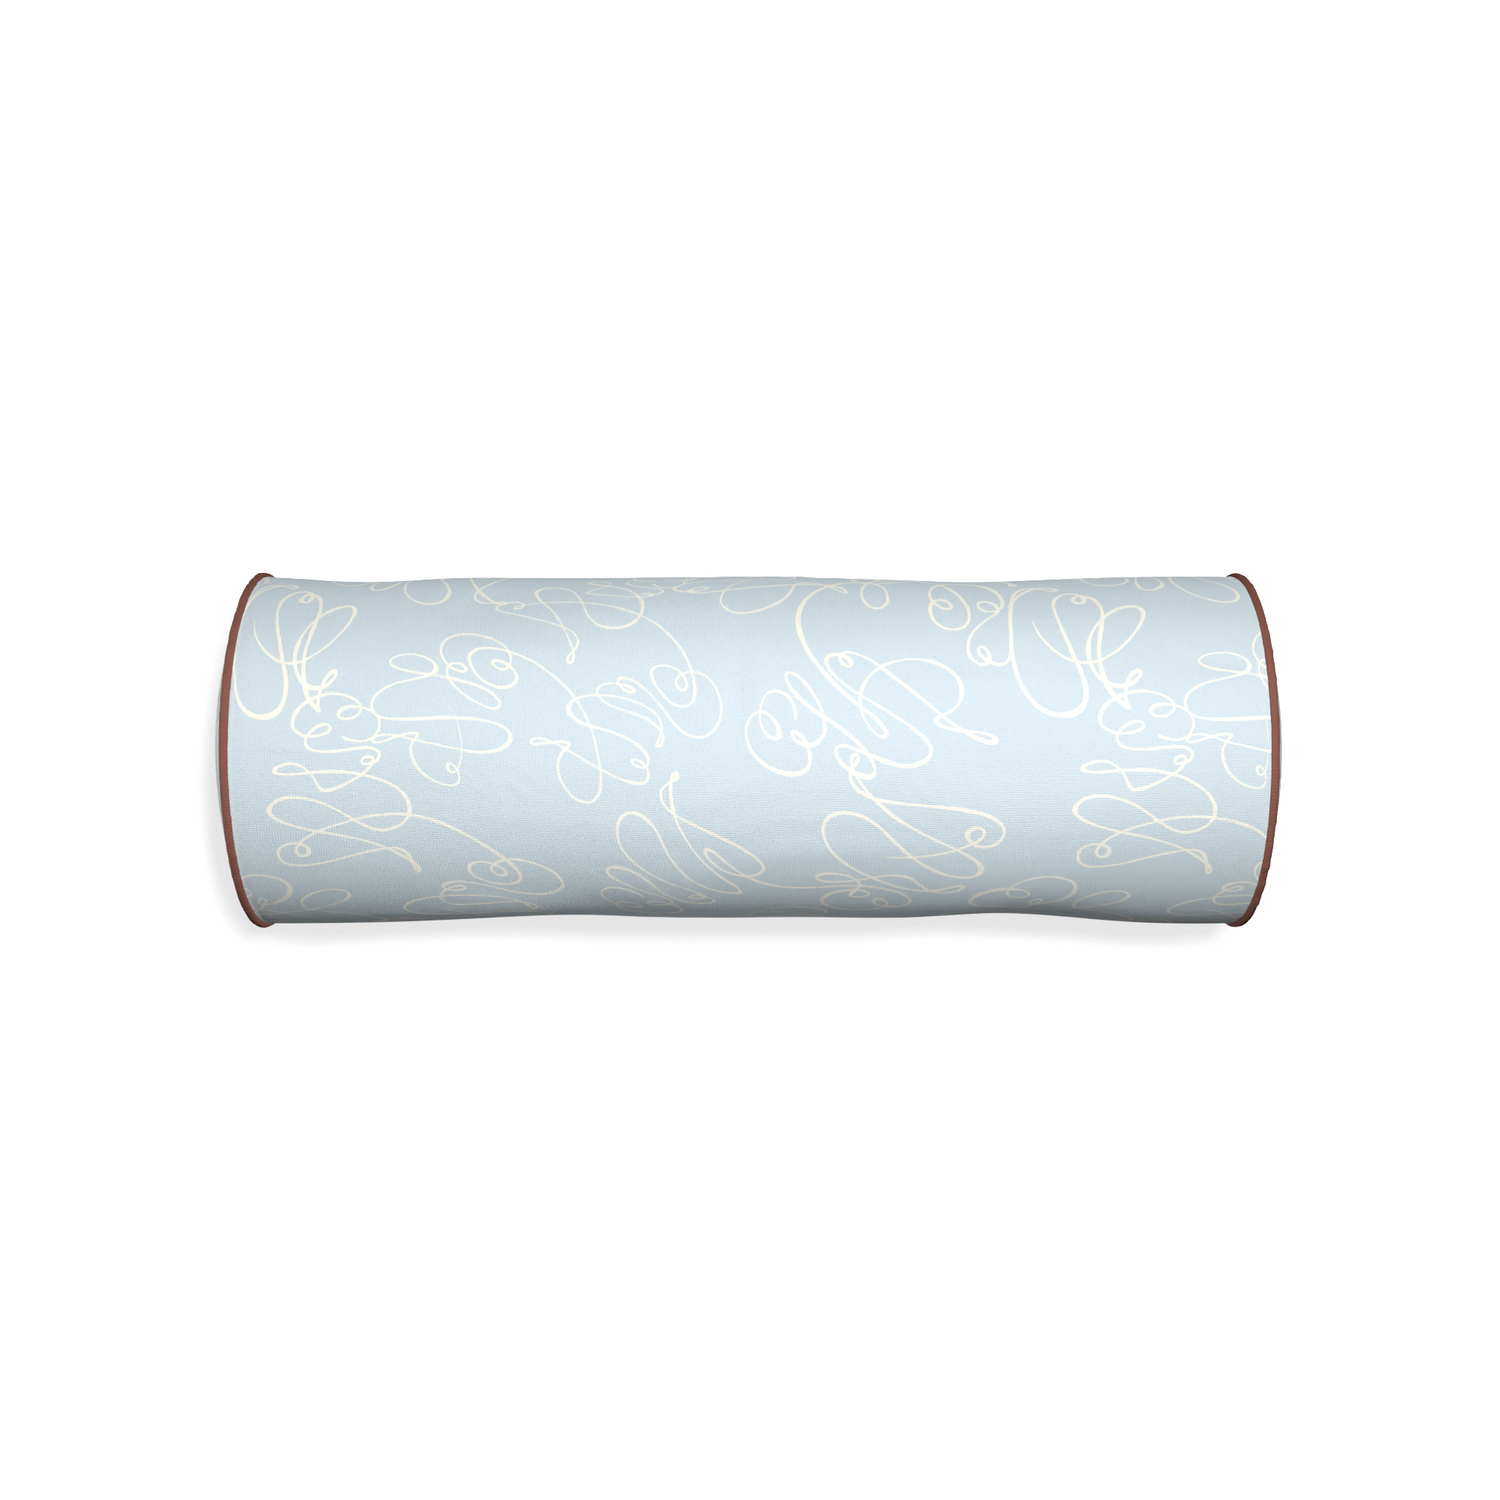 Bolster mirabella custom powder blue abstractpillow with w piping on white background